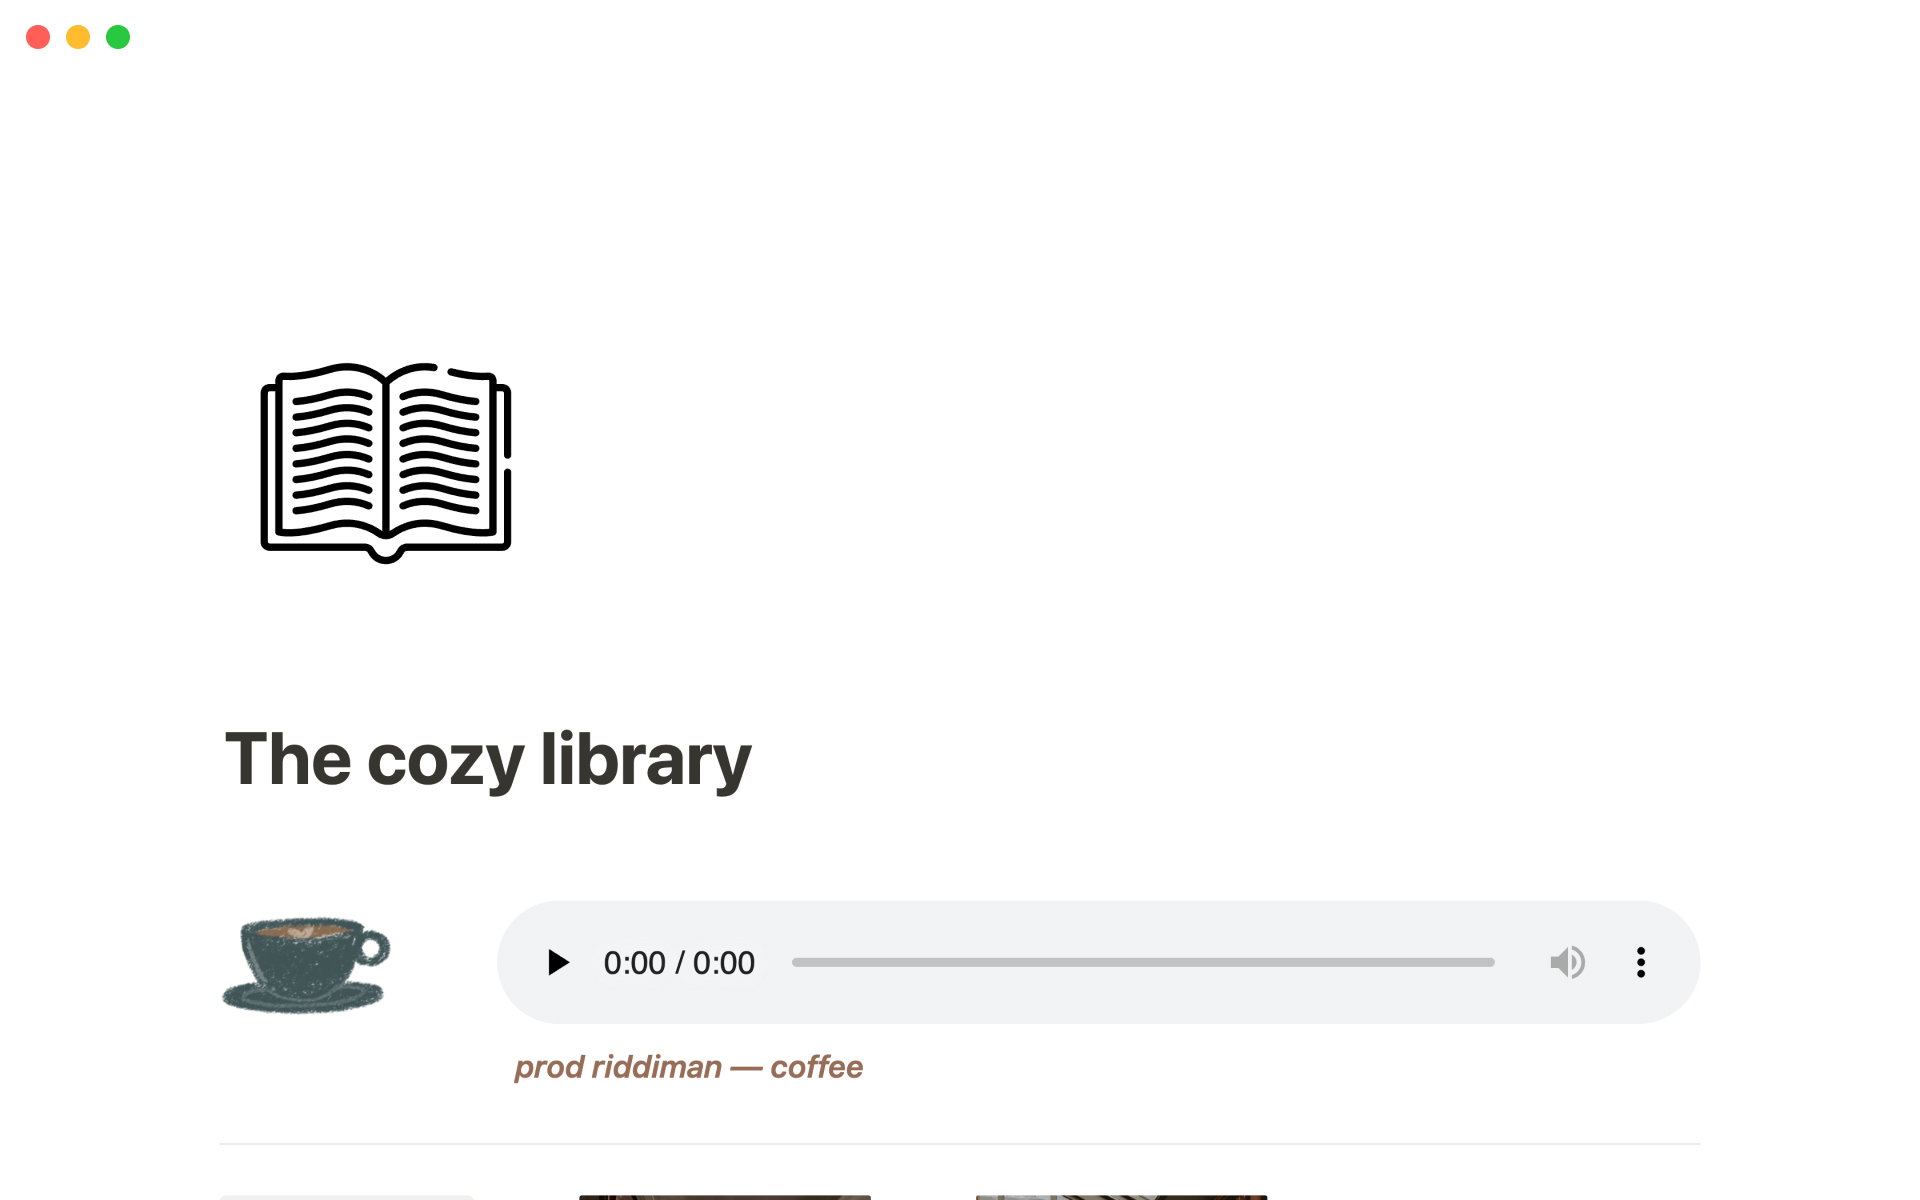 The desktop image for the Cozy library template